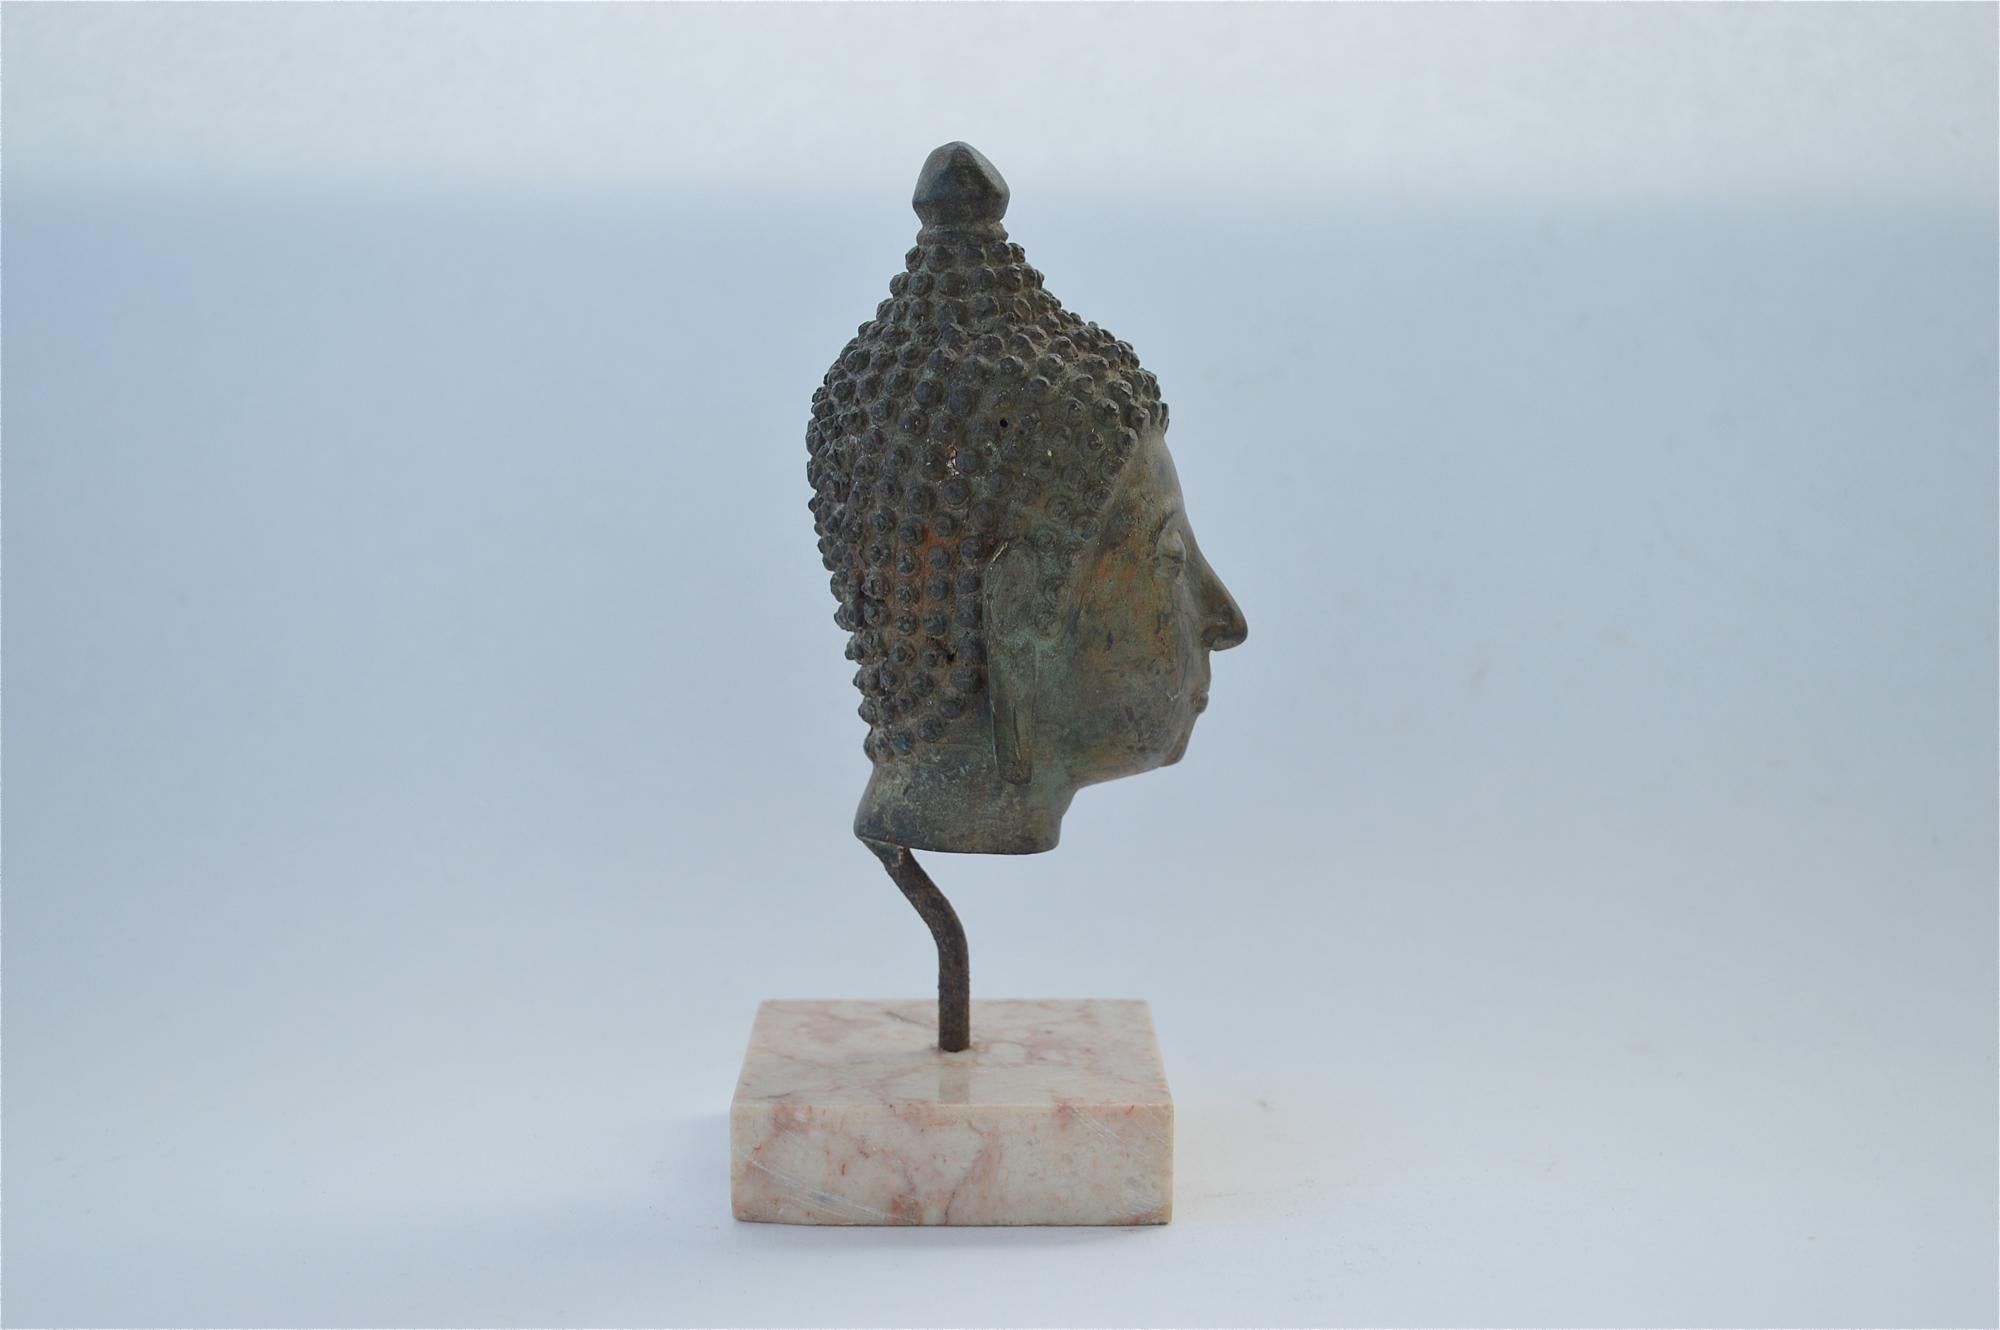 Anglo-Indian Bronze Sculpture of the Head of Buddha